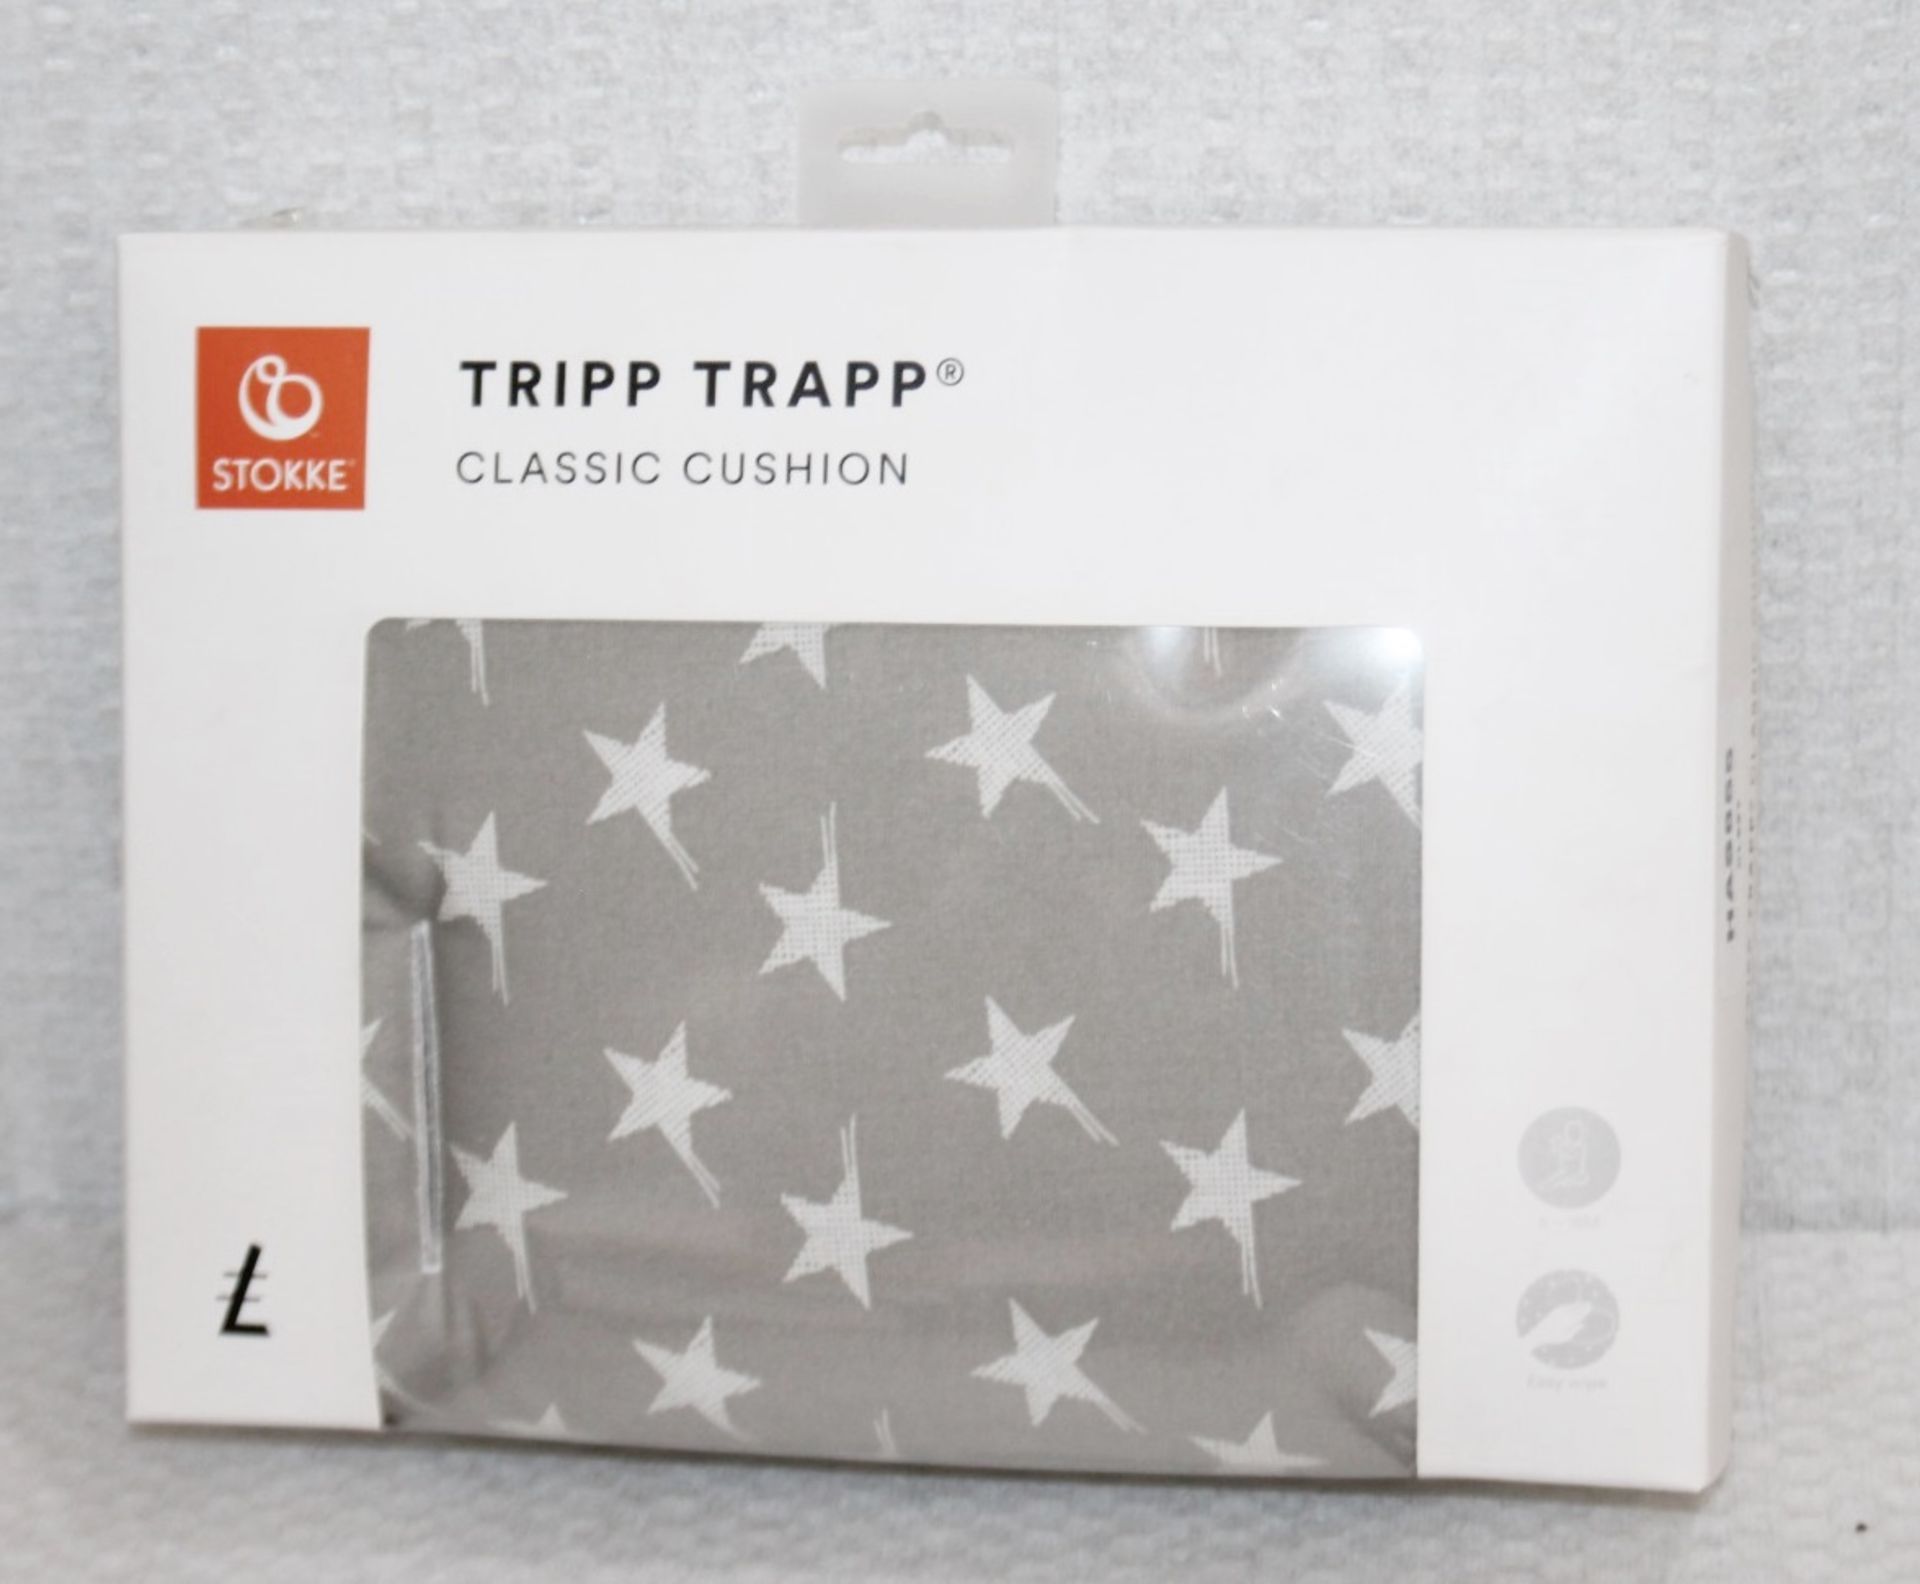 1 x STOKKE Tripp Trap Classic Cushion Accessory - Colour: Grey Stars - Unused Boxed Stock - Ref: - Image 3 of 4